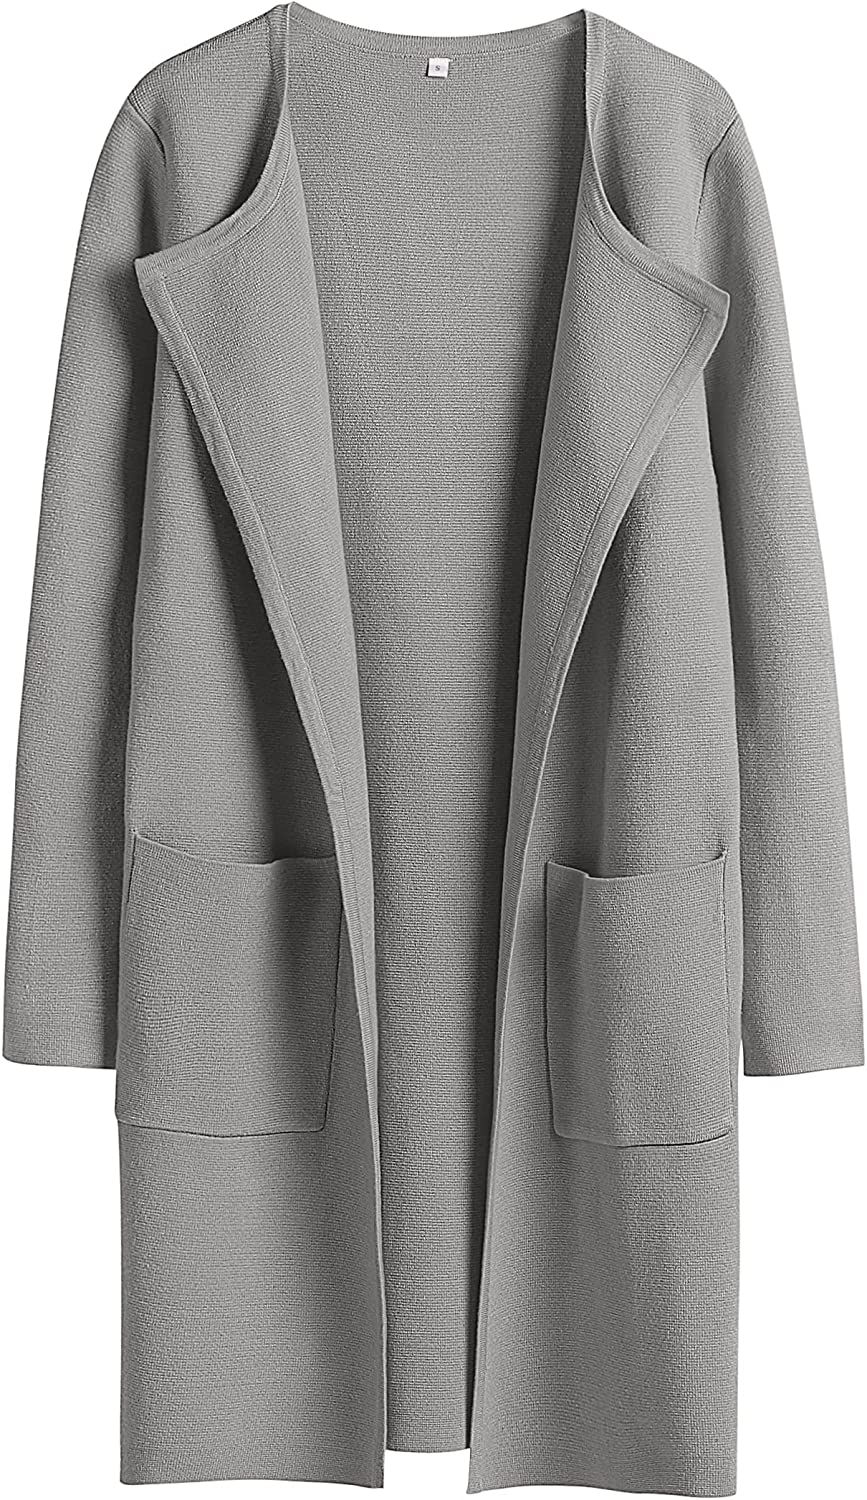 ANRABESS Women's Open Front Knit Cardigan Long Sleeve Lapel Casual Solid Classy Sweater Jacket | Amazon (US)